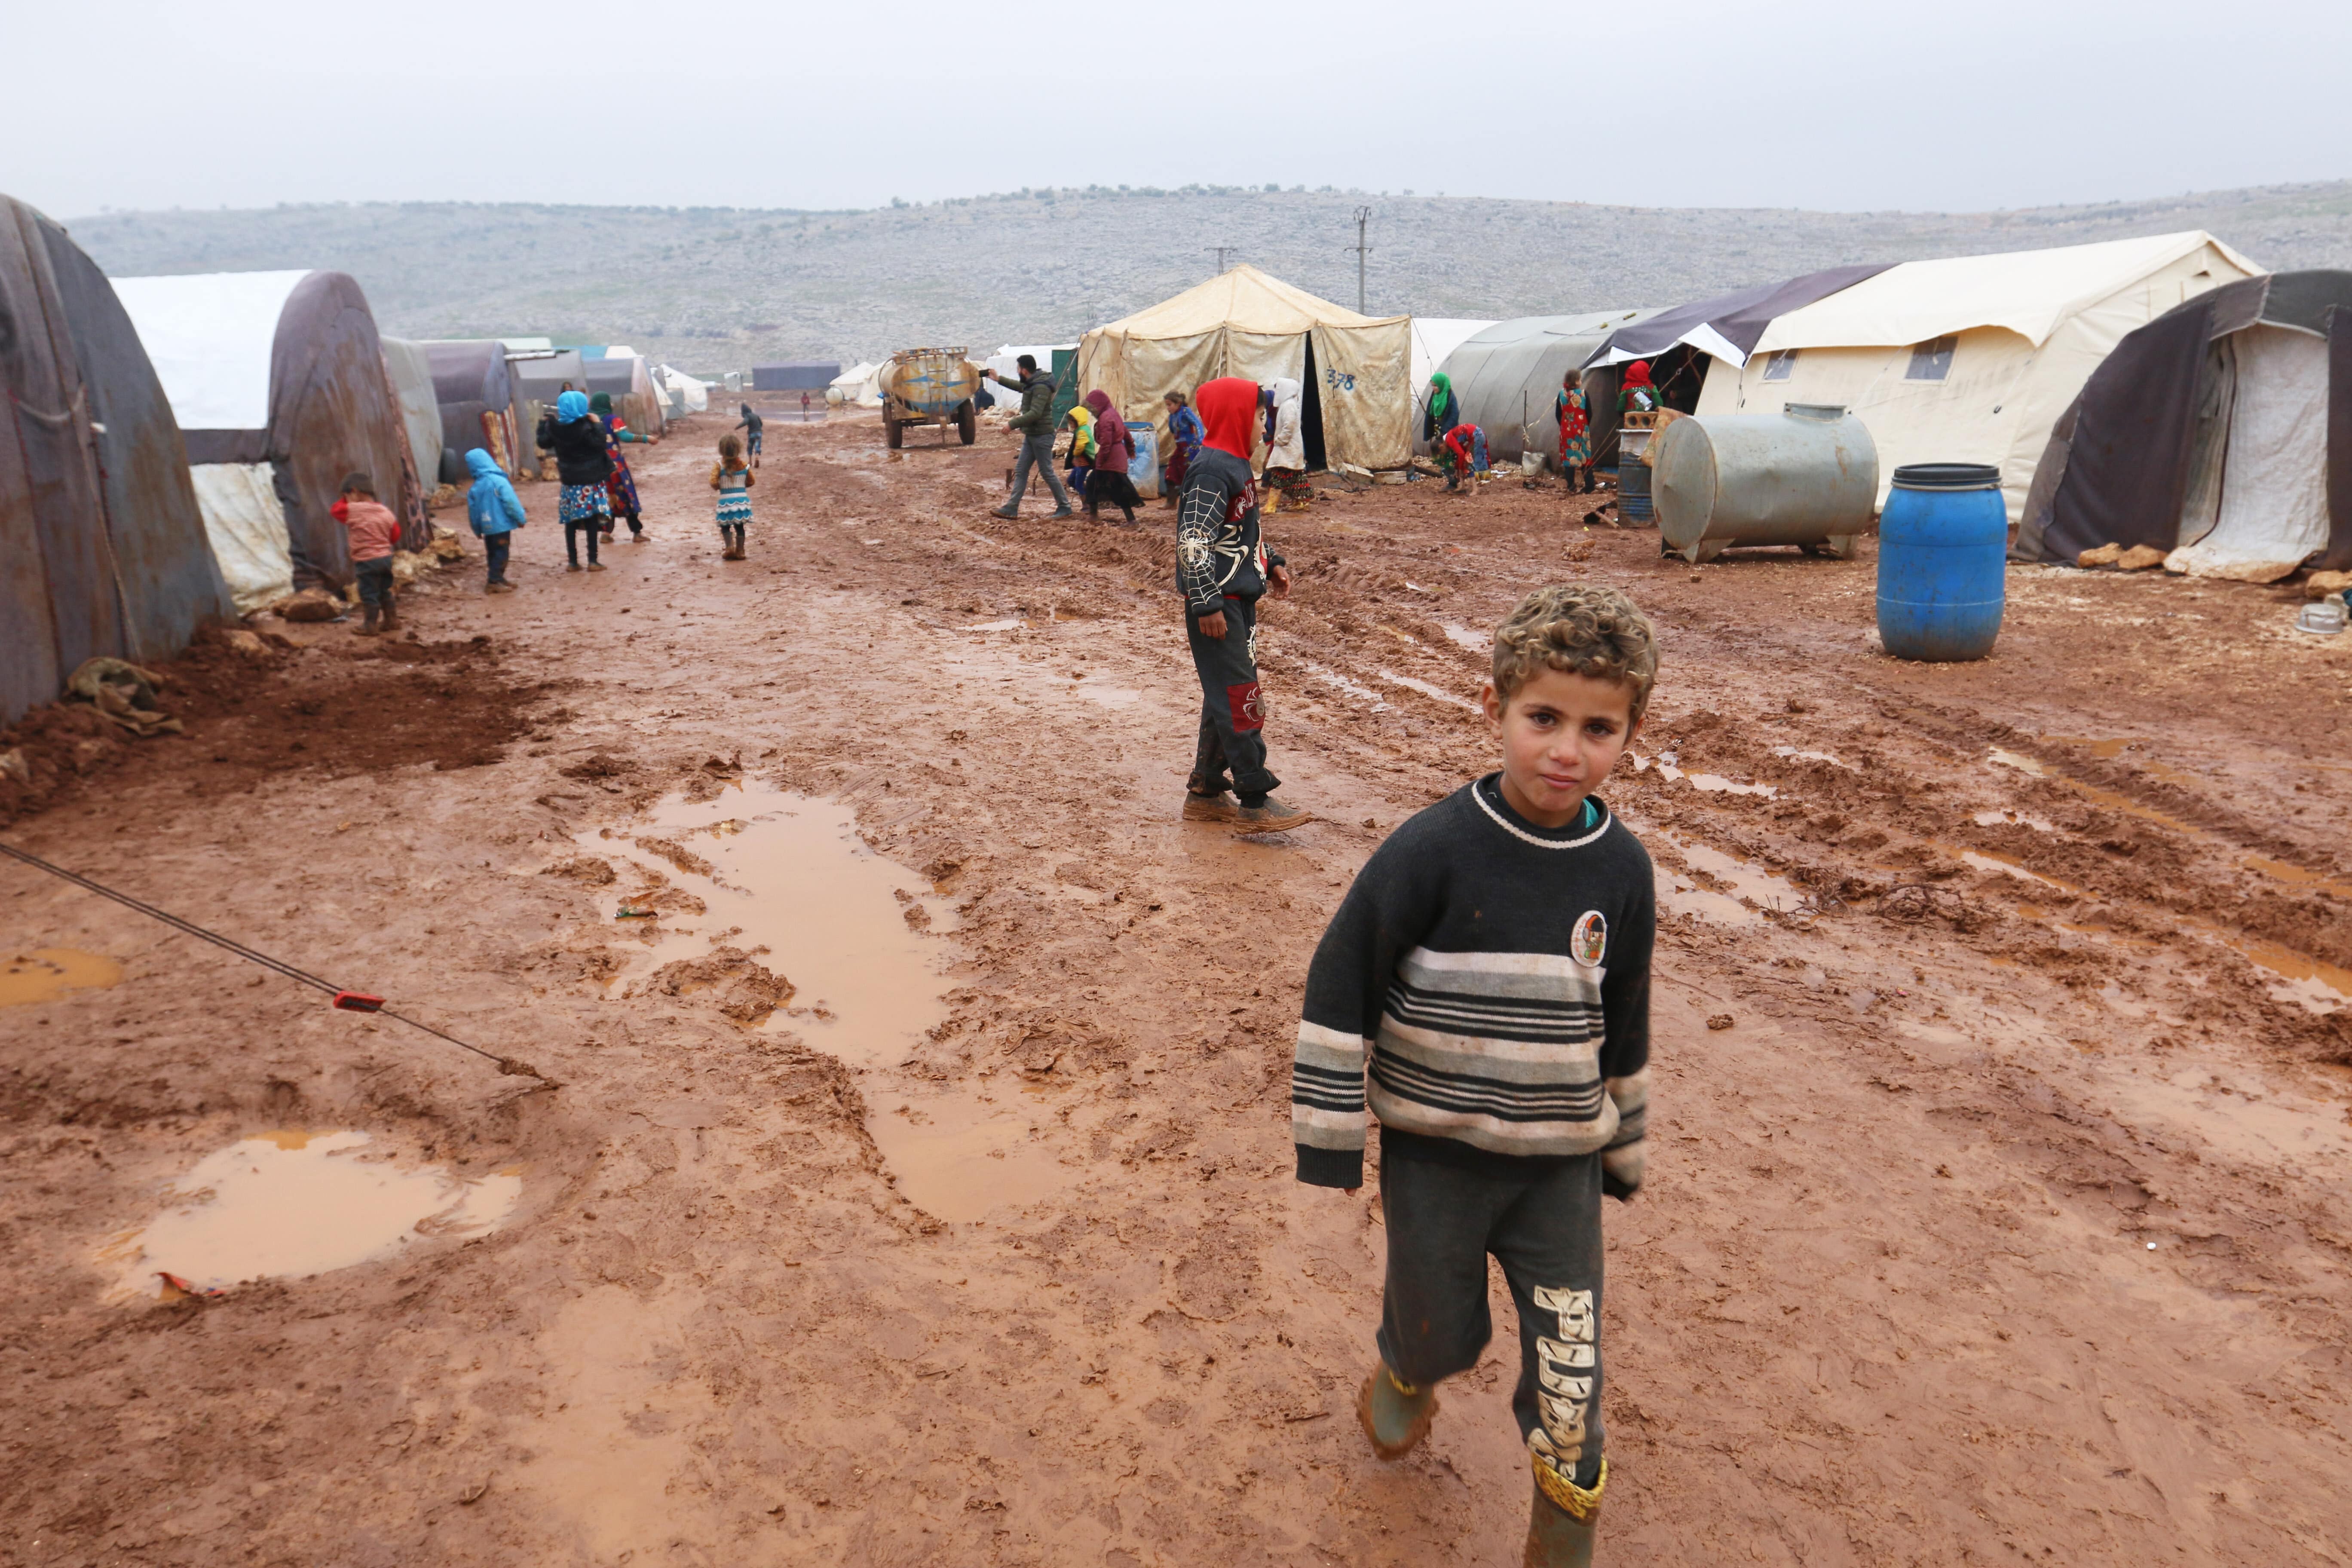 Thousands of Syrians have been without running water since last week